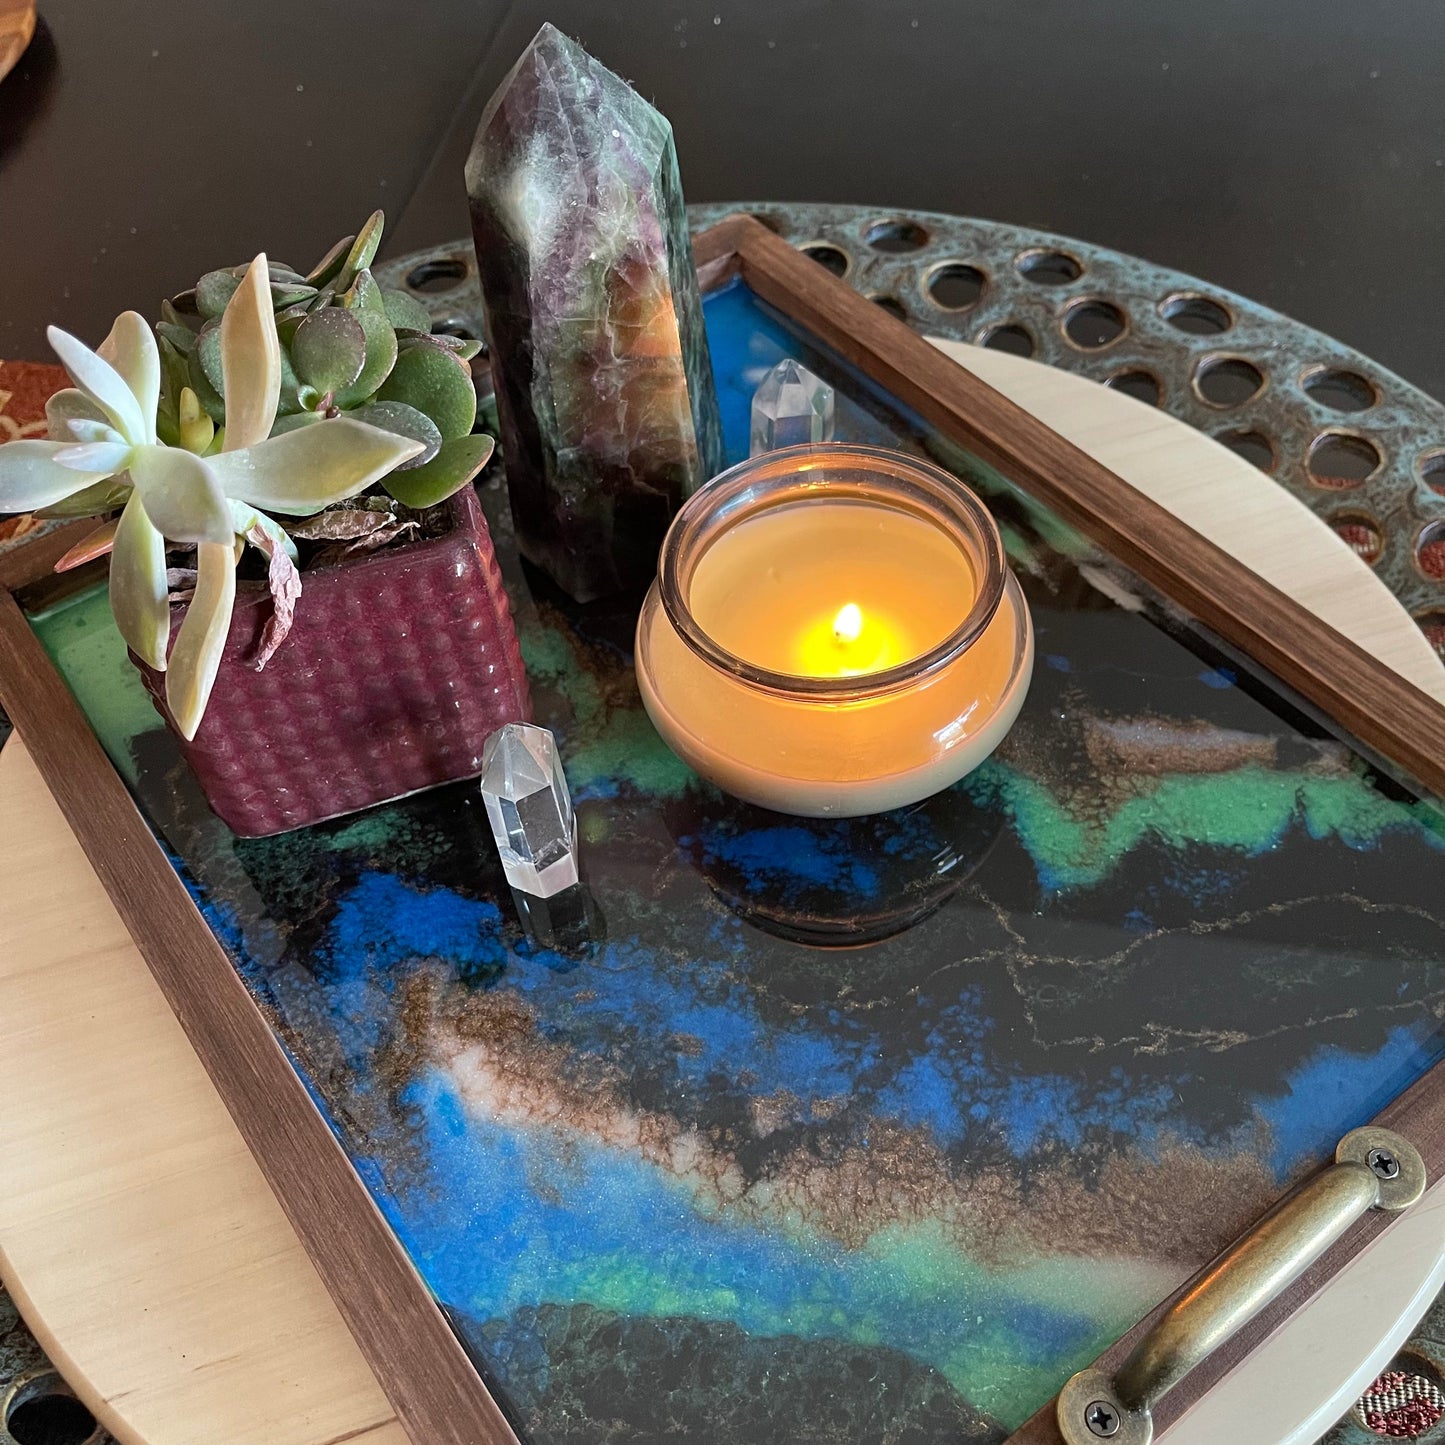 Resin Tray Class - 11/11 @ 1pm